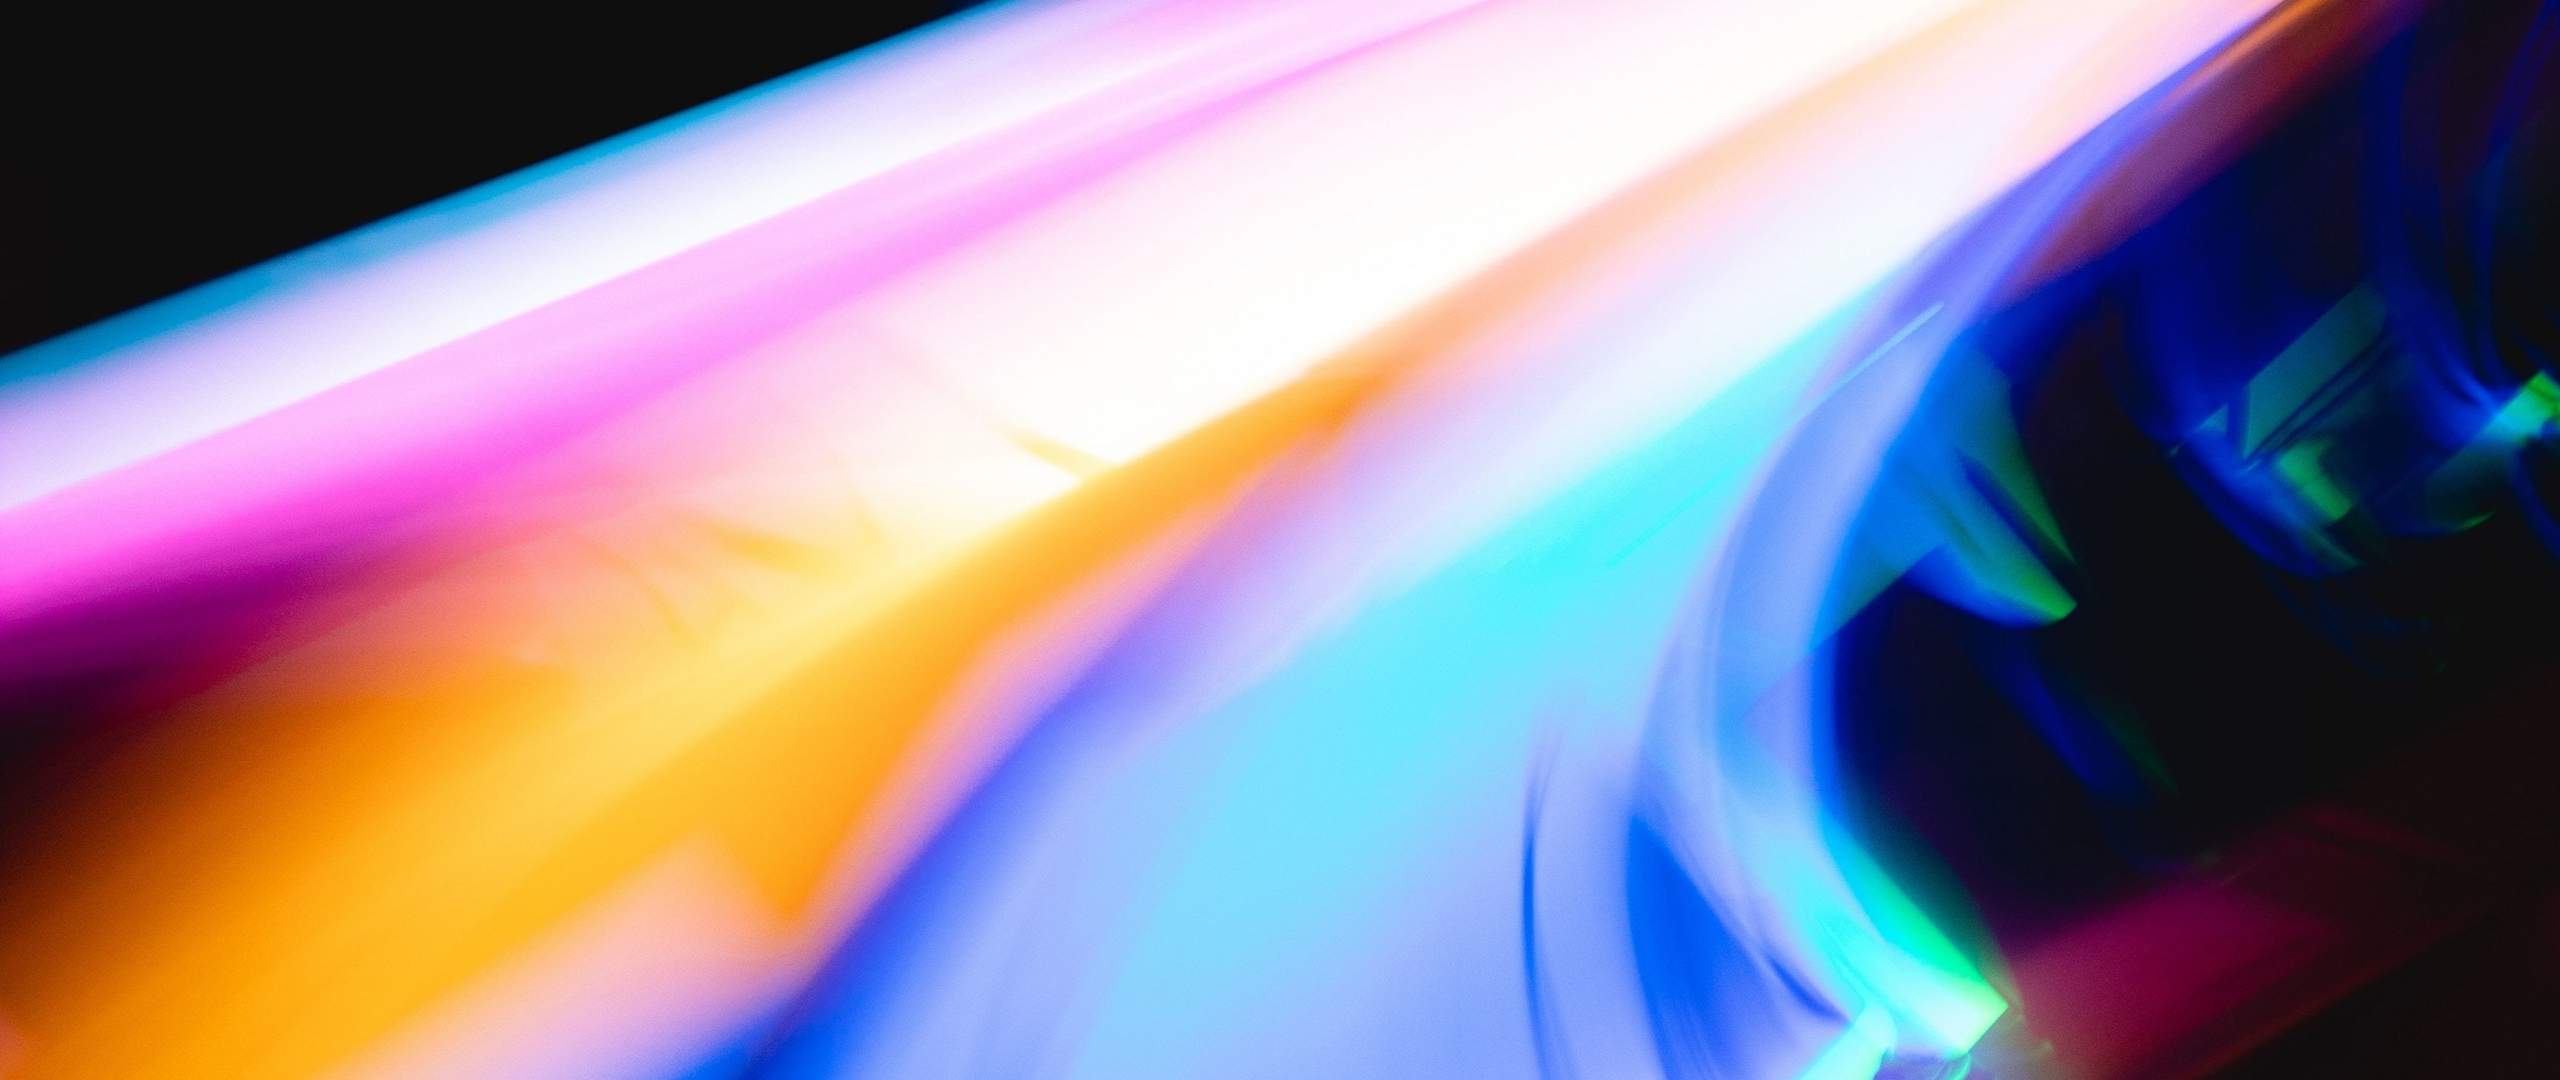 Download wallpaper 2560x1080 neon, flare, colorful, close up, dual wide ...